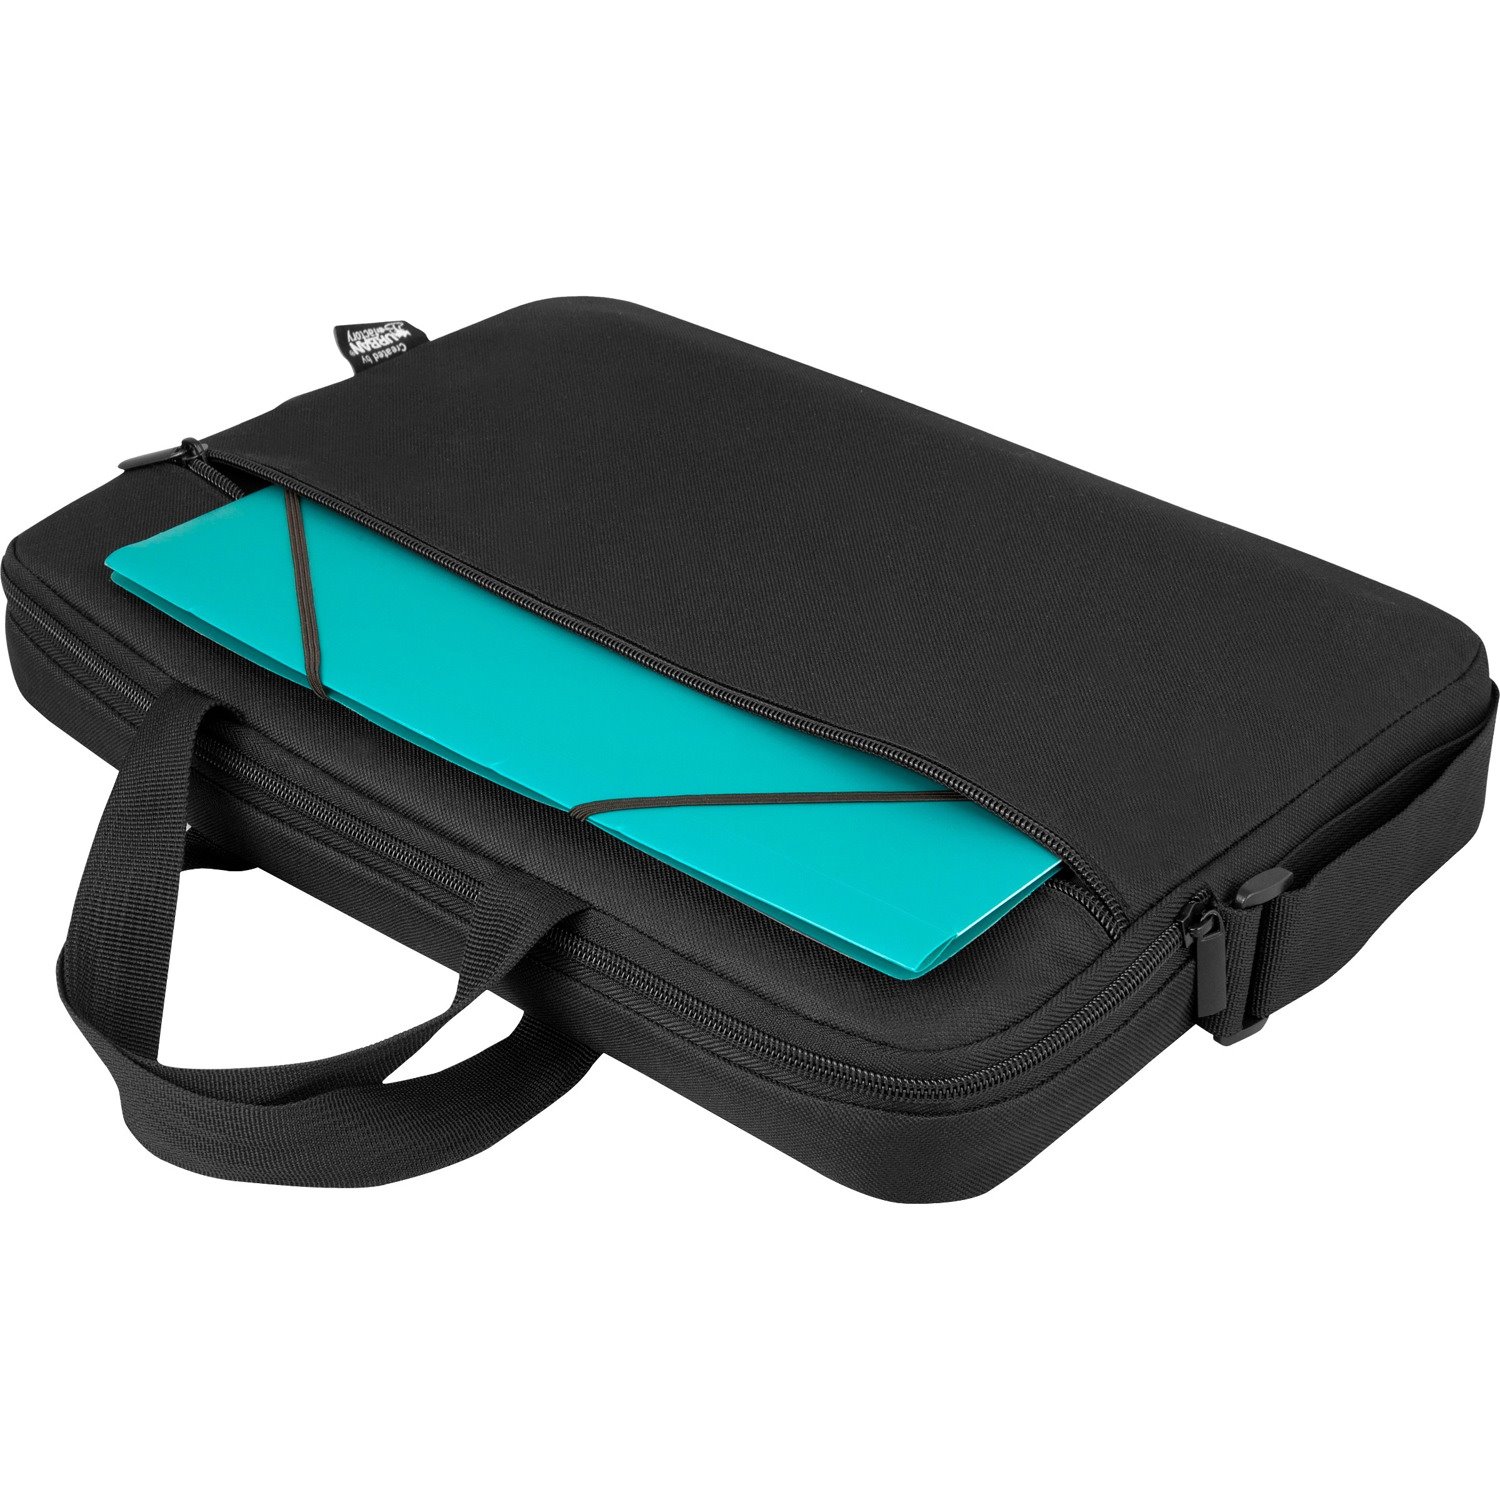 Urban Factory Nylee Carrying Case for 43.9 cm (17.3") Notebook - Black